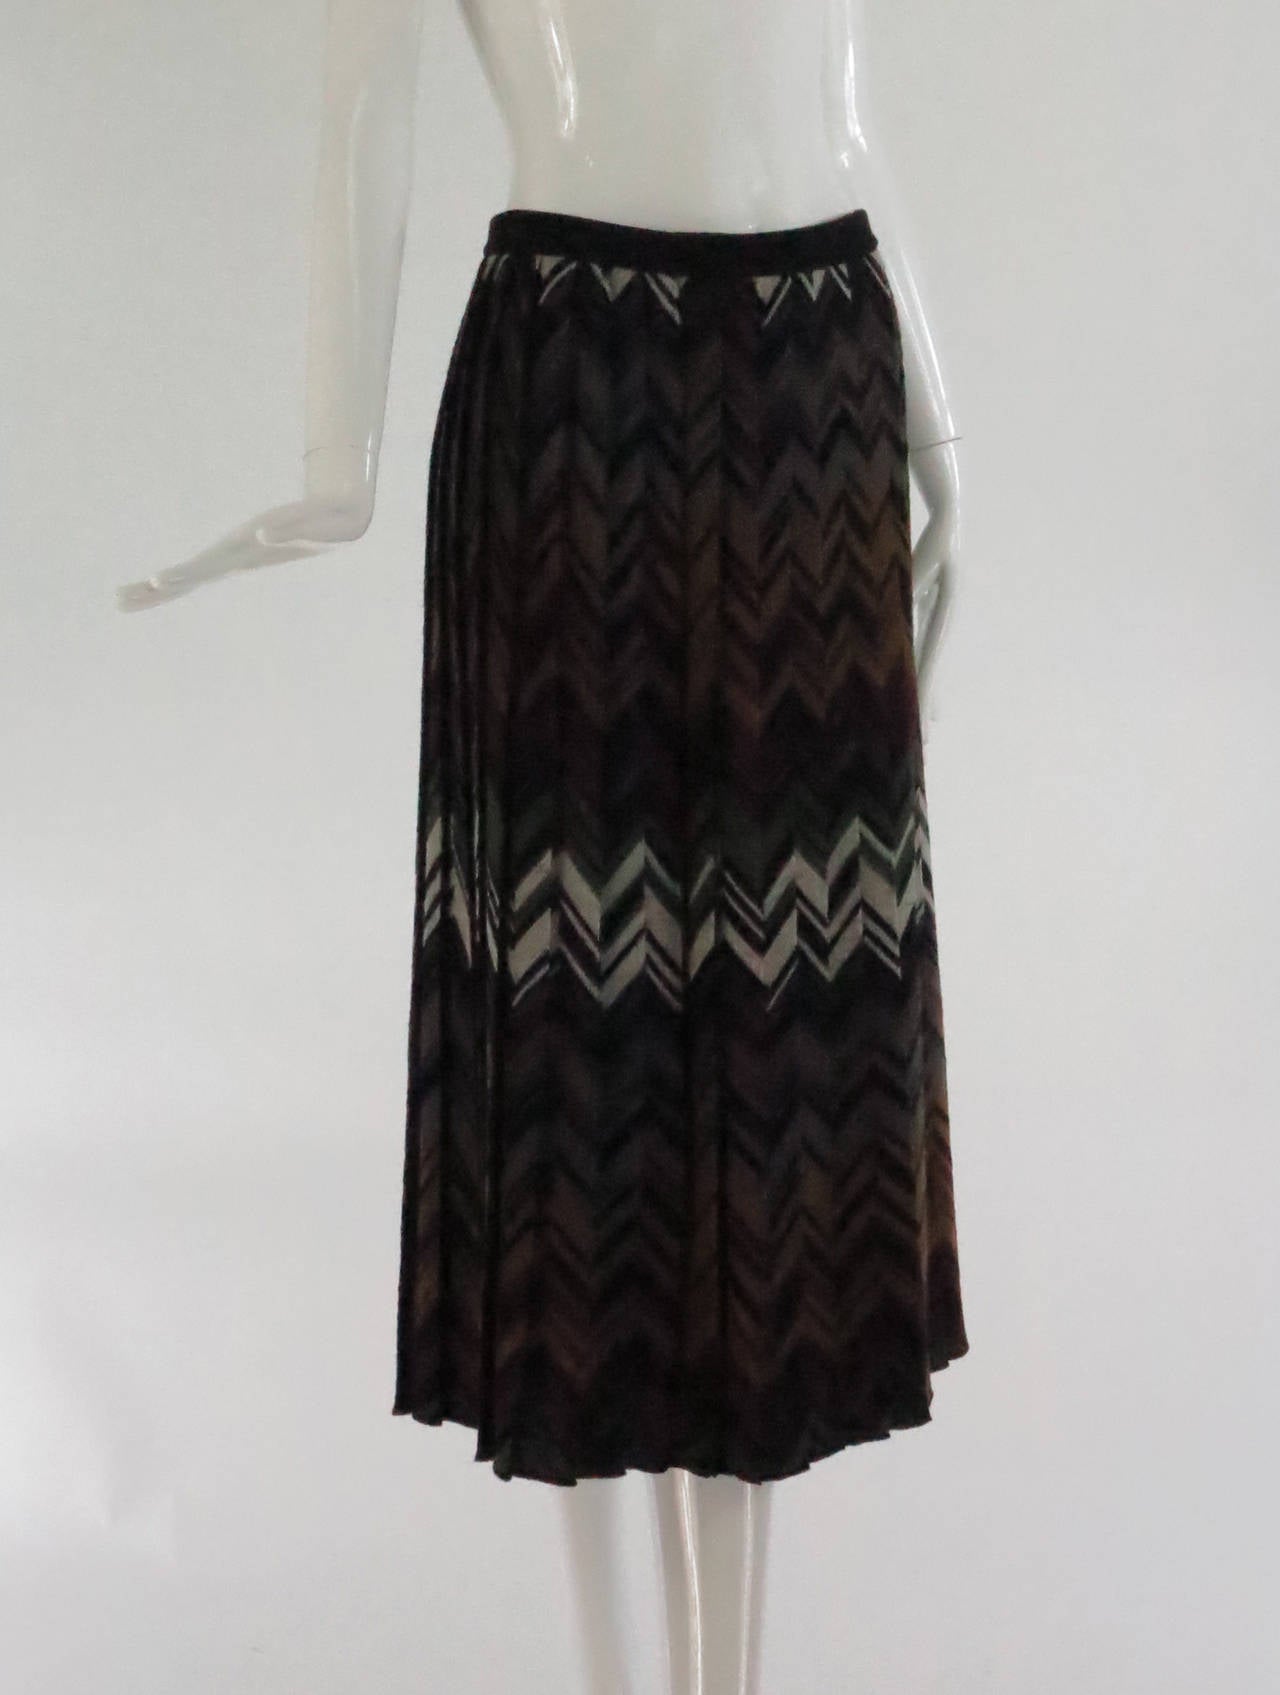 Missoni wool knit knife pleated skirt in chevron stripes of brown, black, dark & light gray and cream...Unlined skirt has a cased elastic pull on waist...Fits a Medium-Large...Unworn

Please check the measurements provided below and compare with